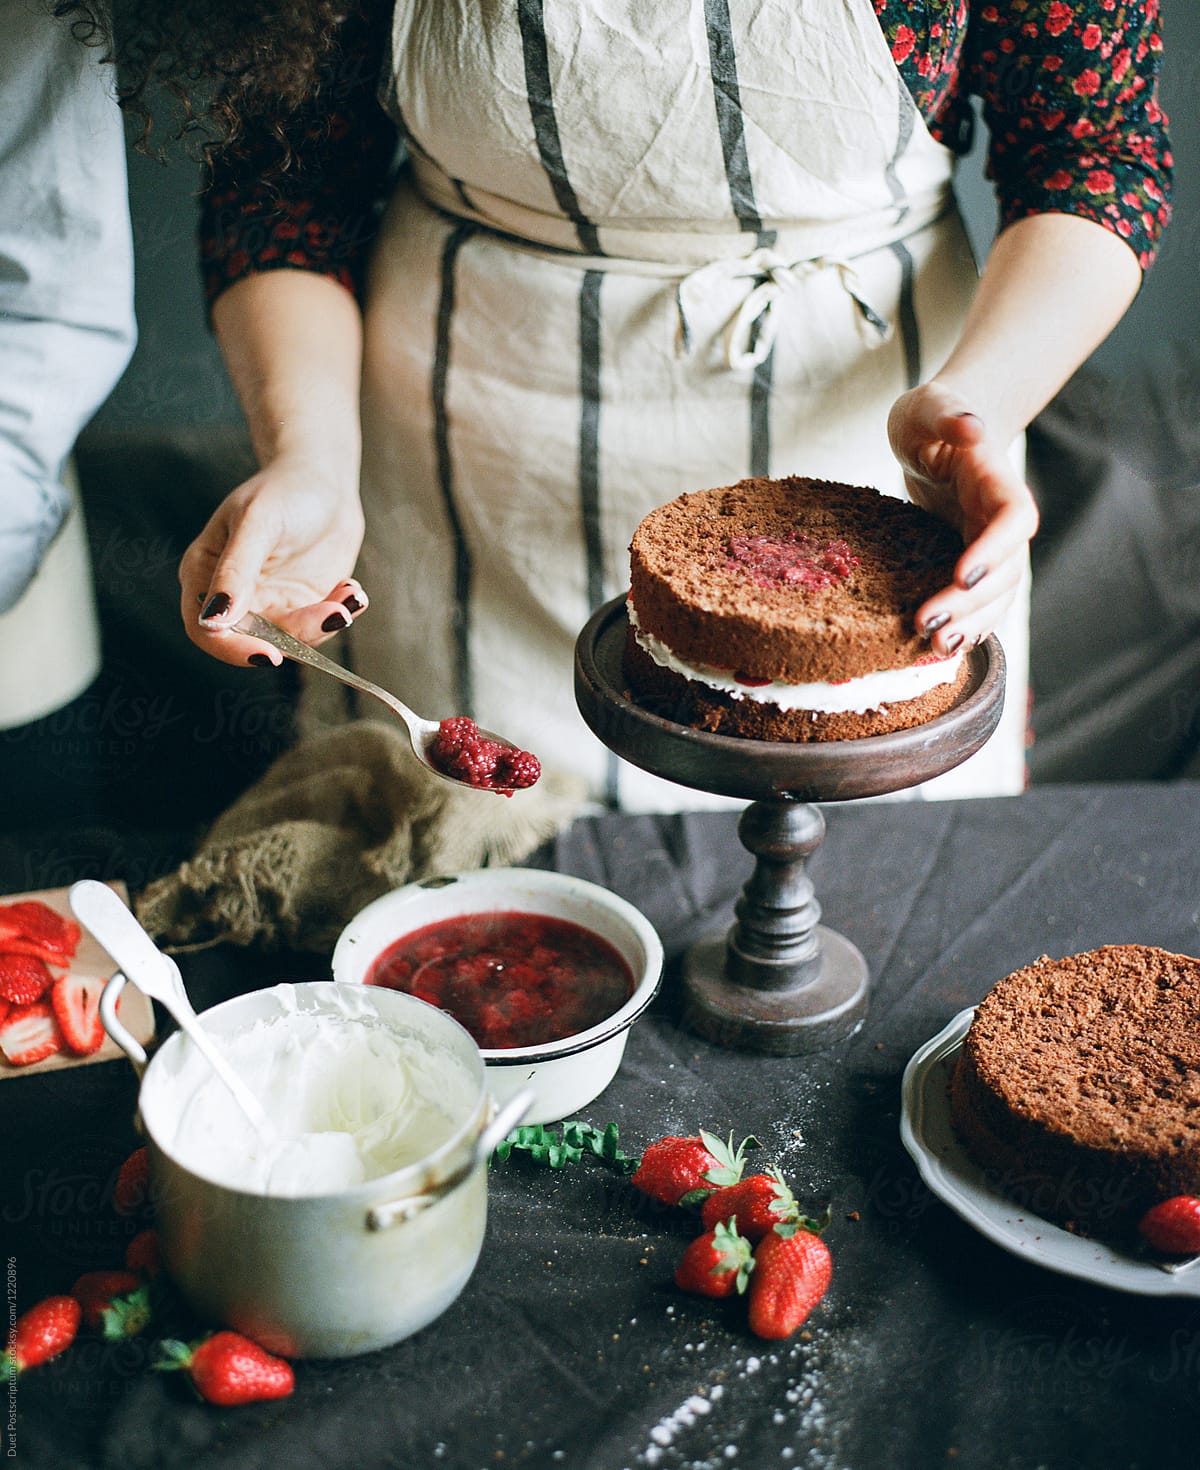 A cook puts berries into cake